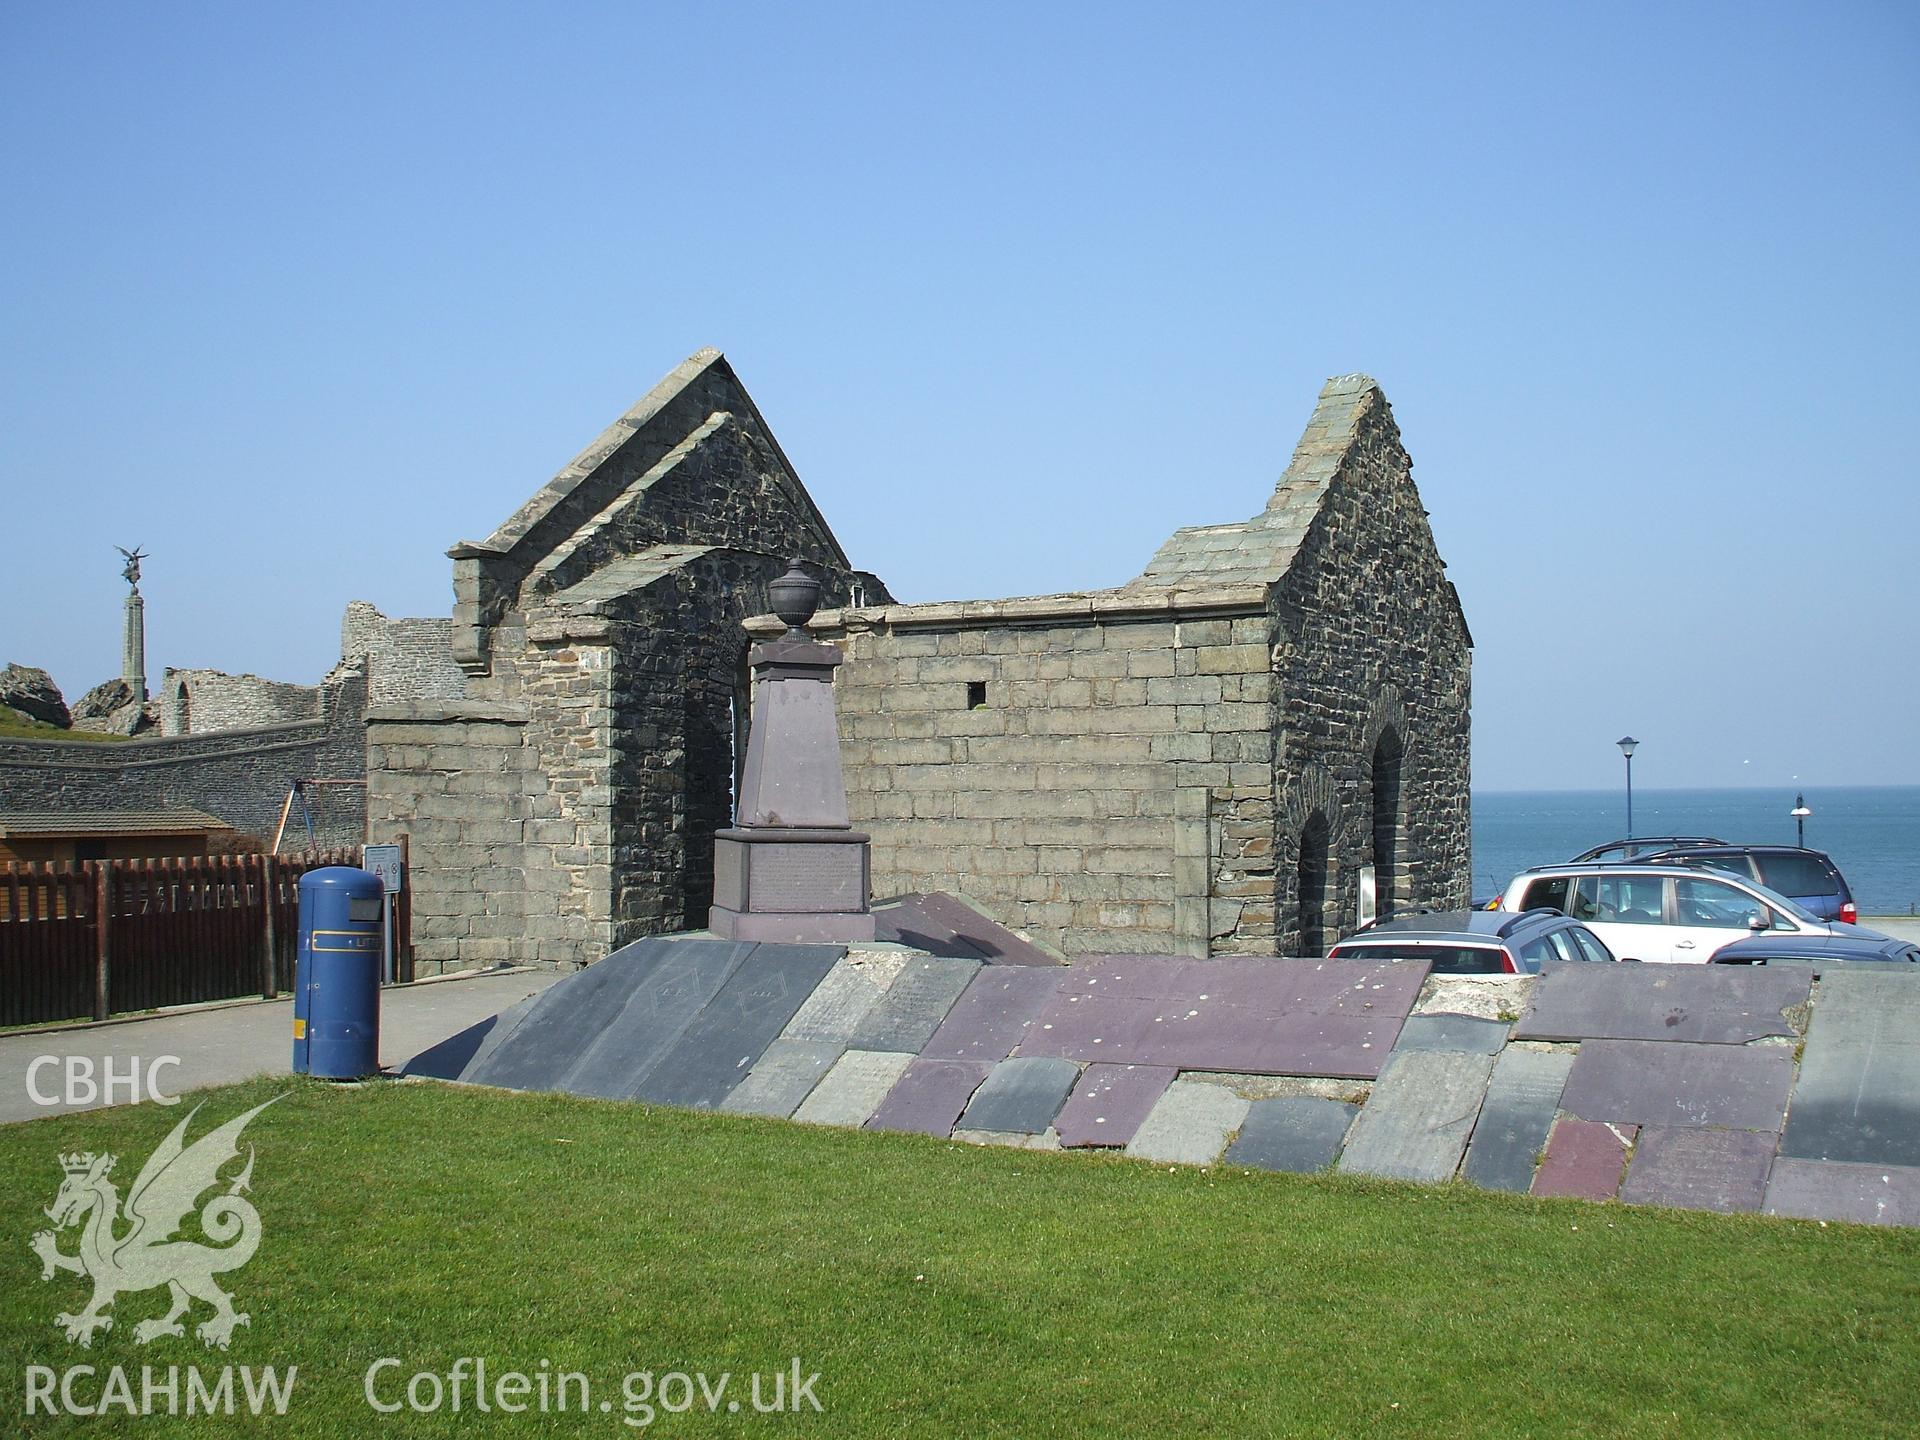 Colour digital photograph showing the exterior of St. Michael's Church, Aberystwyth.